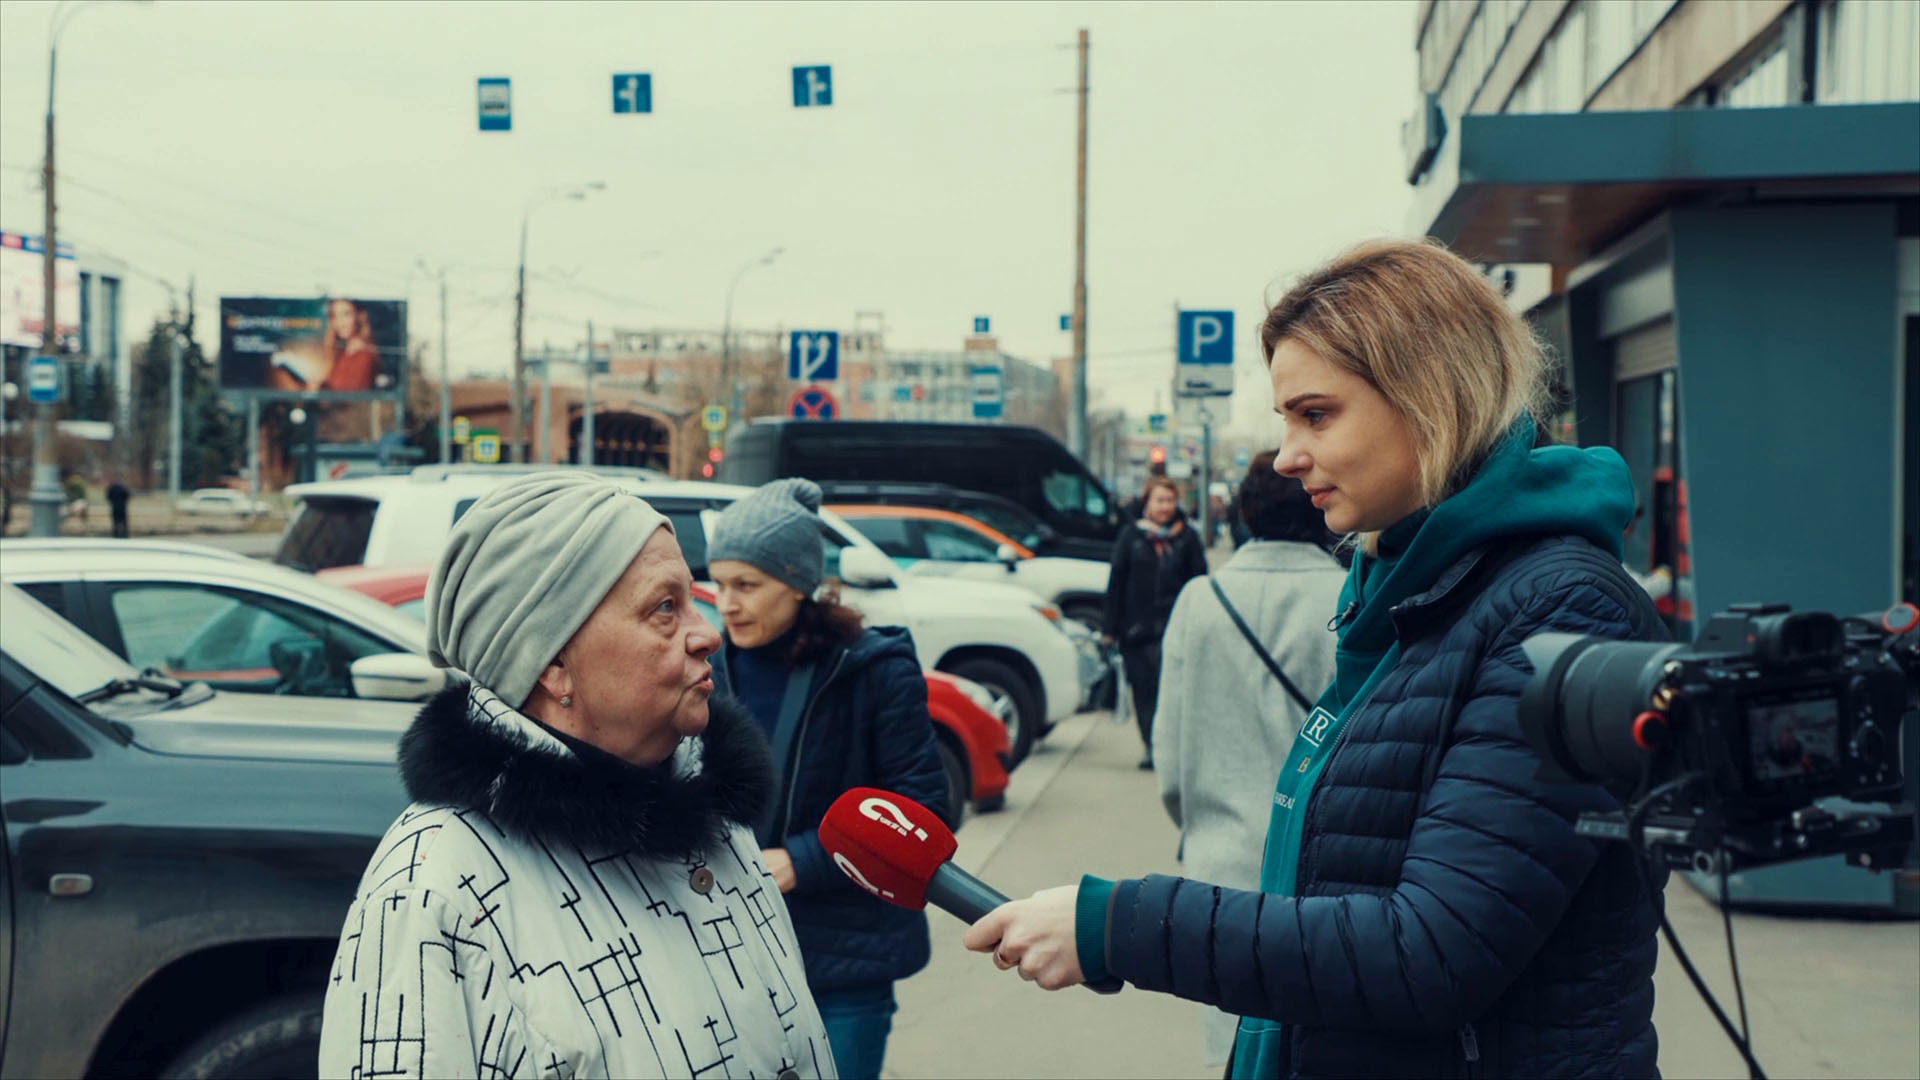 New BBC World Service documentary exhibits Russians rallying against